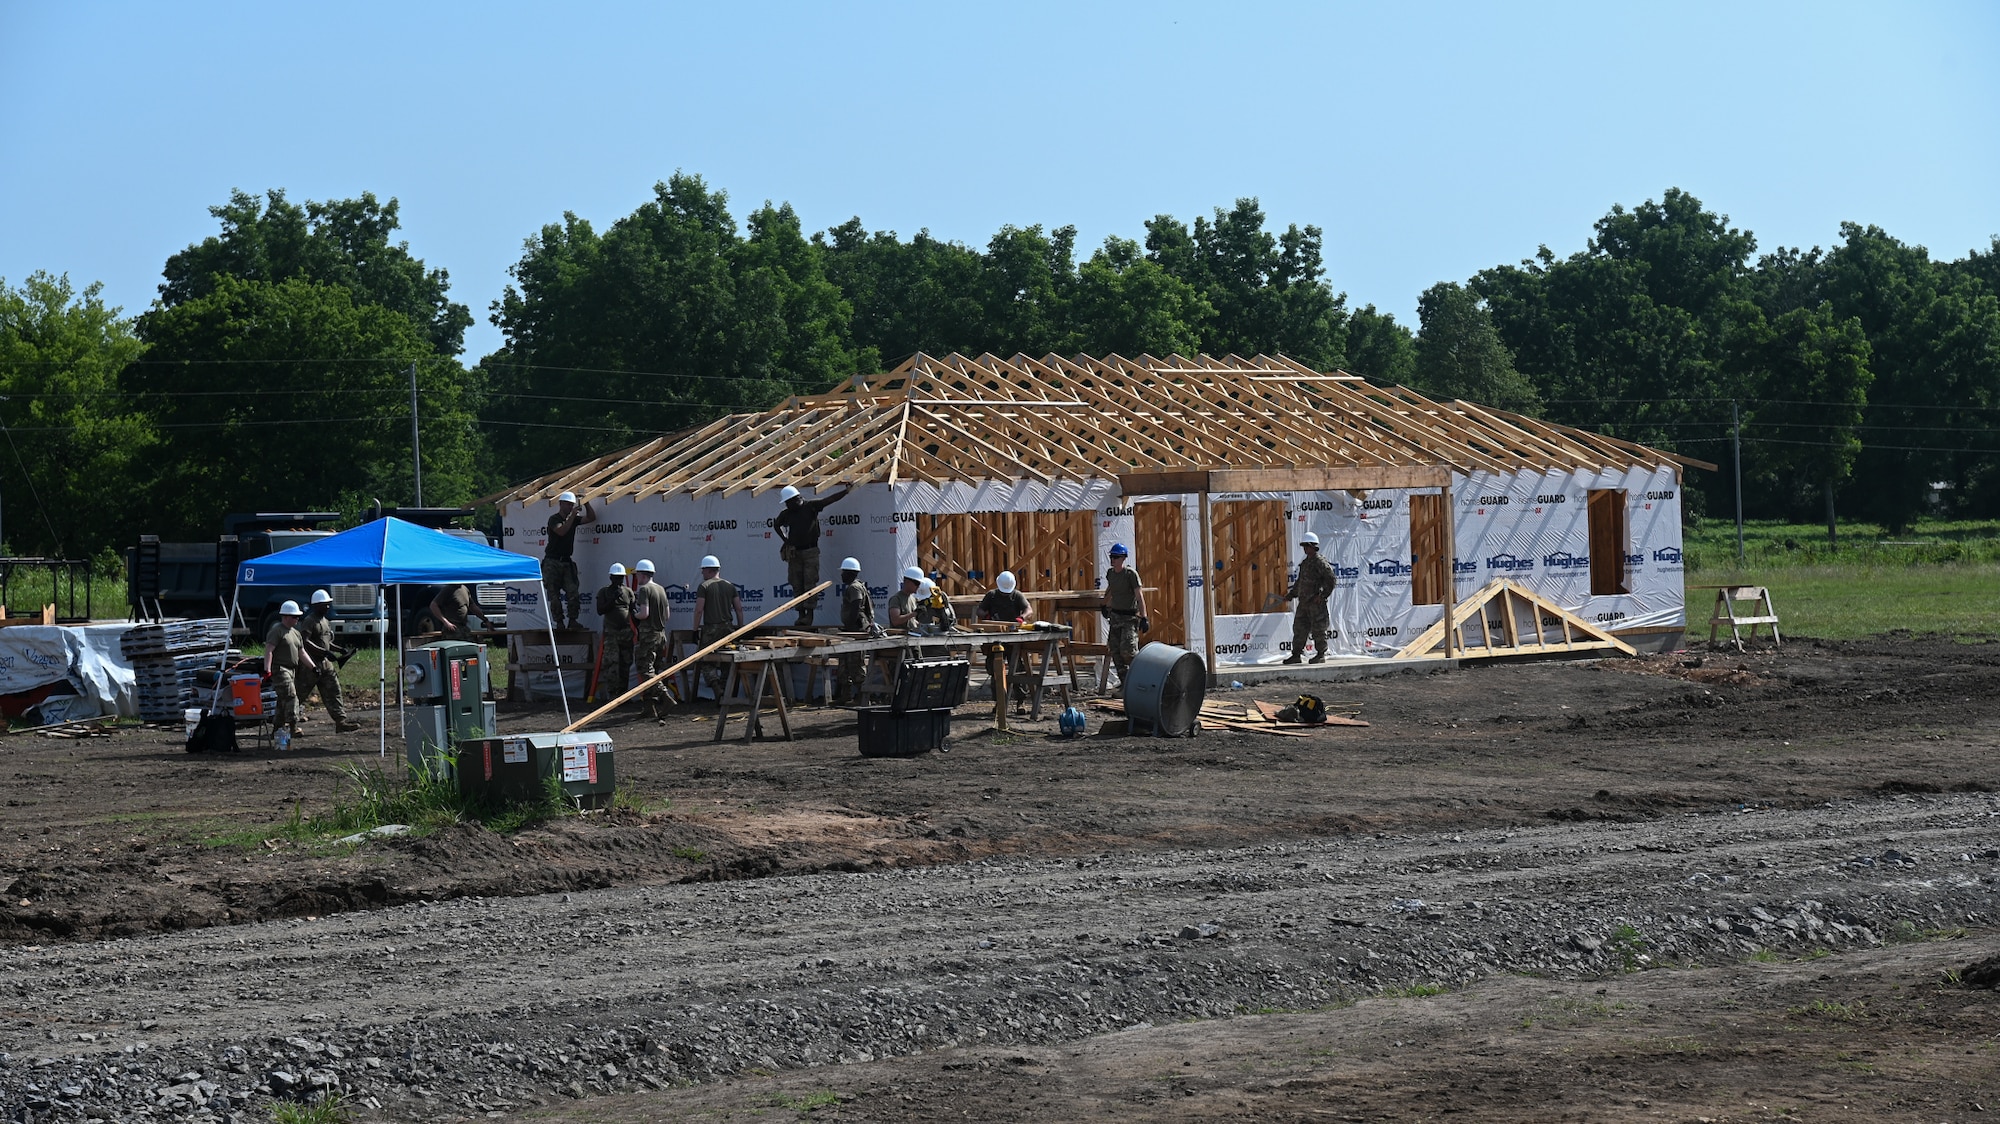 Members from the 175th Wing, Maryland Air National Guard, and the 123rd Airlift Wing, Kentucky Air National Guard, build a home for Cherokee veterans in Tahlequah, Oklahoma, Aug. 3, 2021, as part of the Defense Department’s Innovative Readiness Training program.